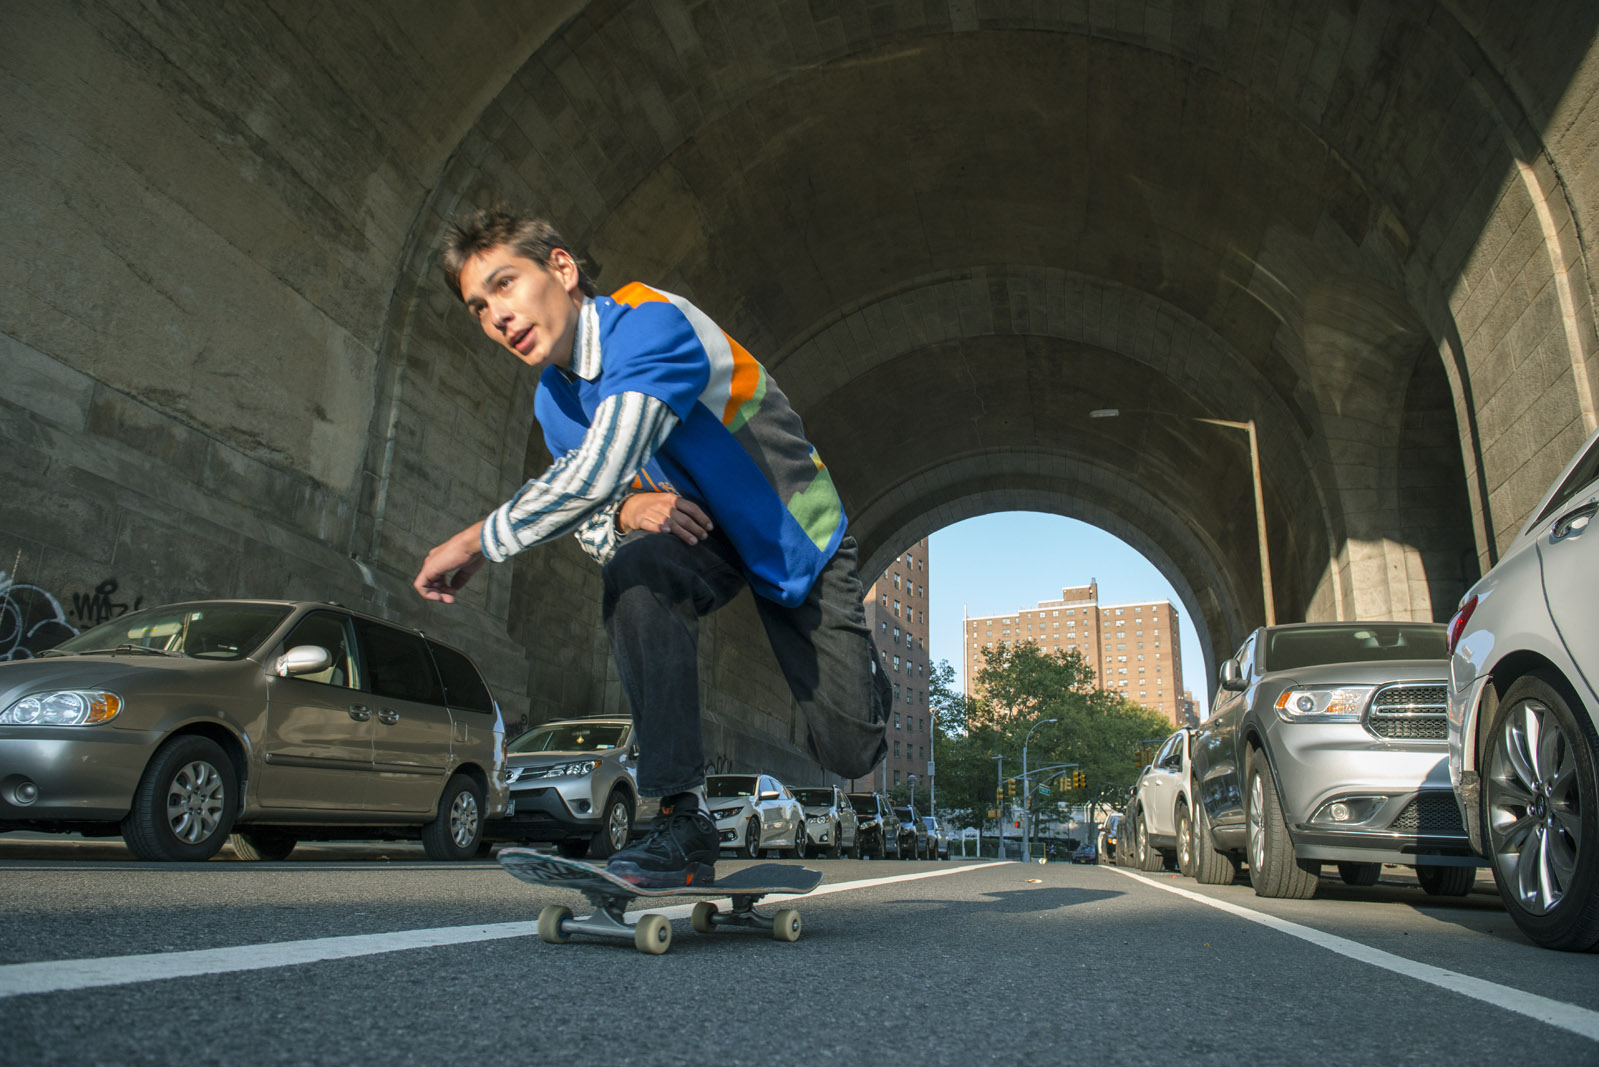 Skateboarding goes luxury as Louis Vuitton signs its first pro skater